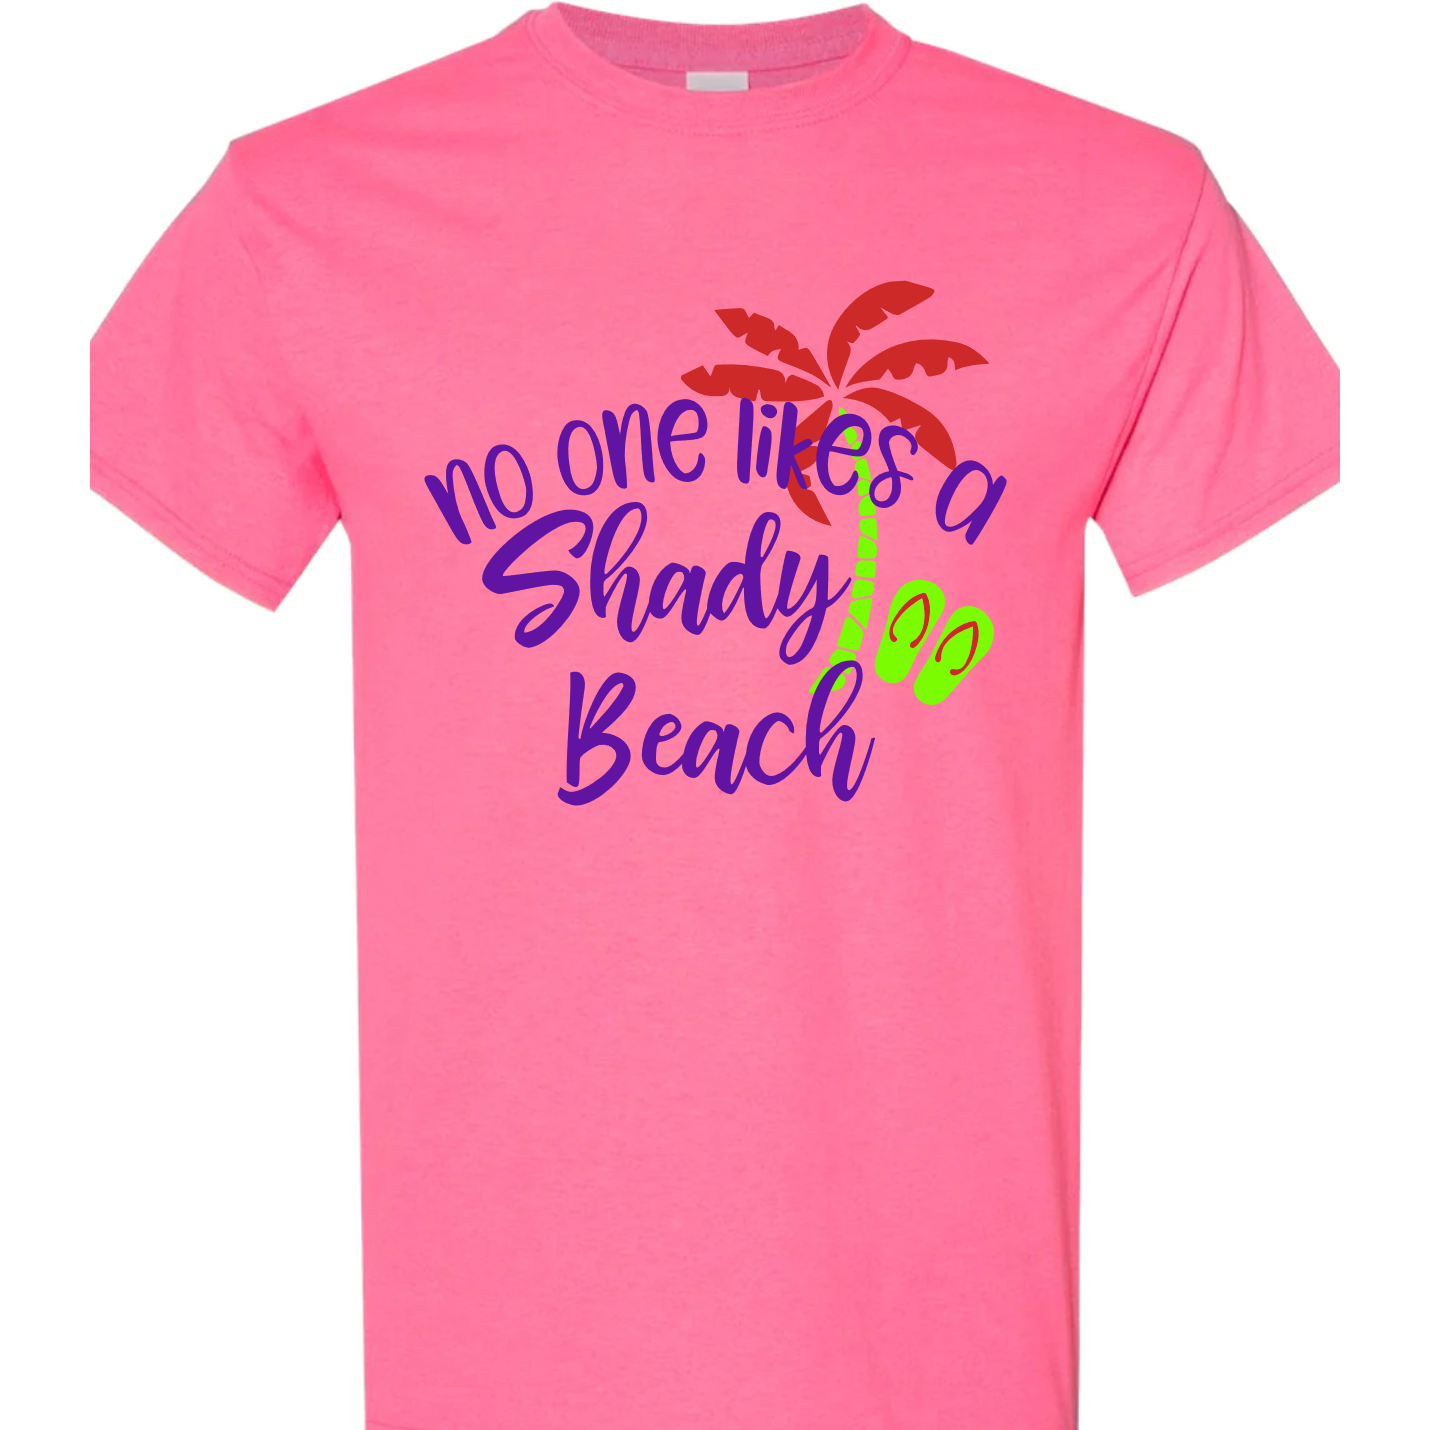 No One Likes a Shady Beach vinyl graphic for shirts